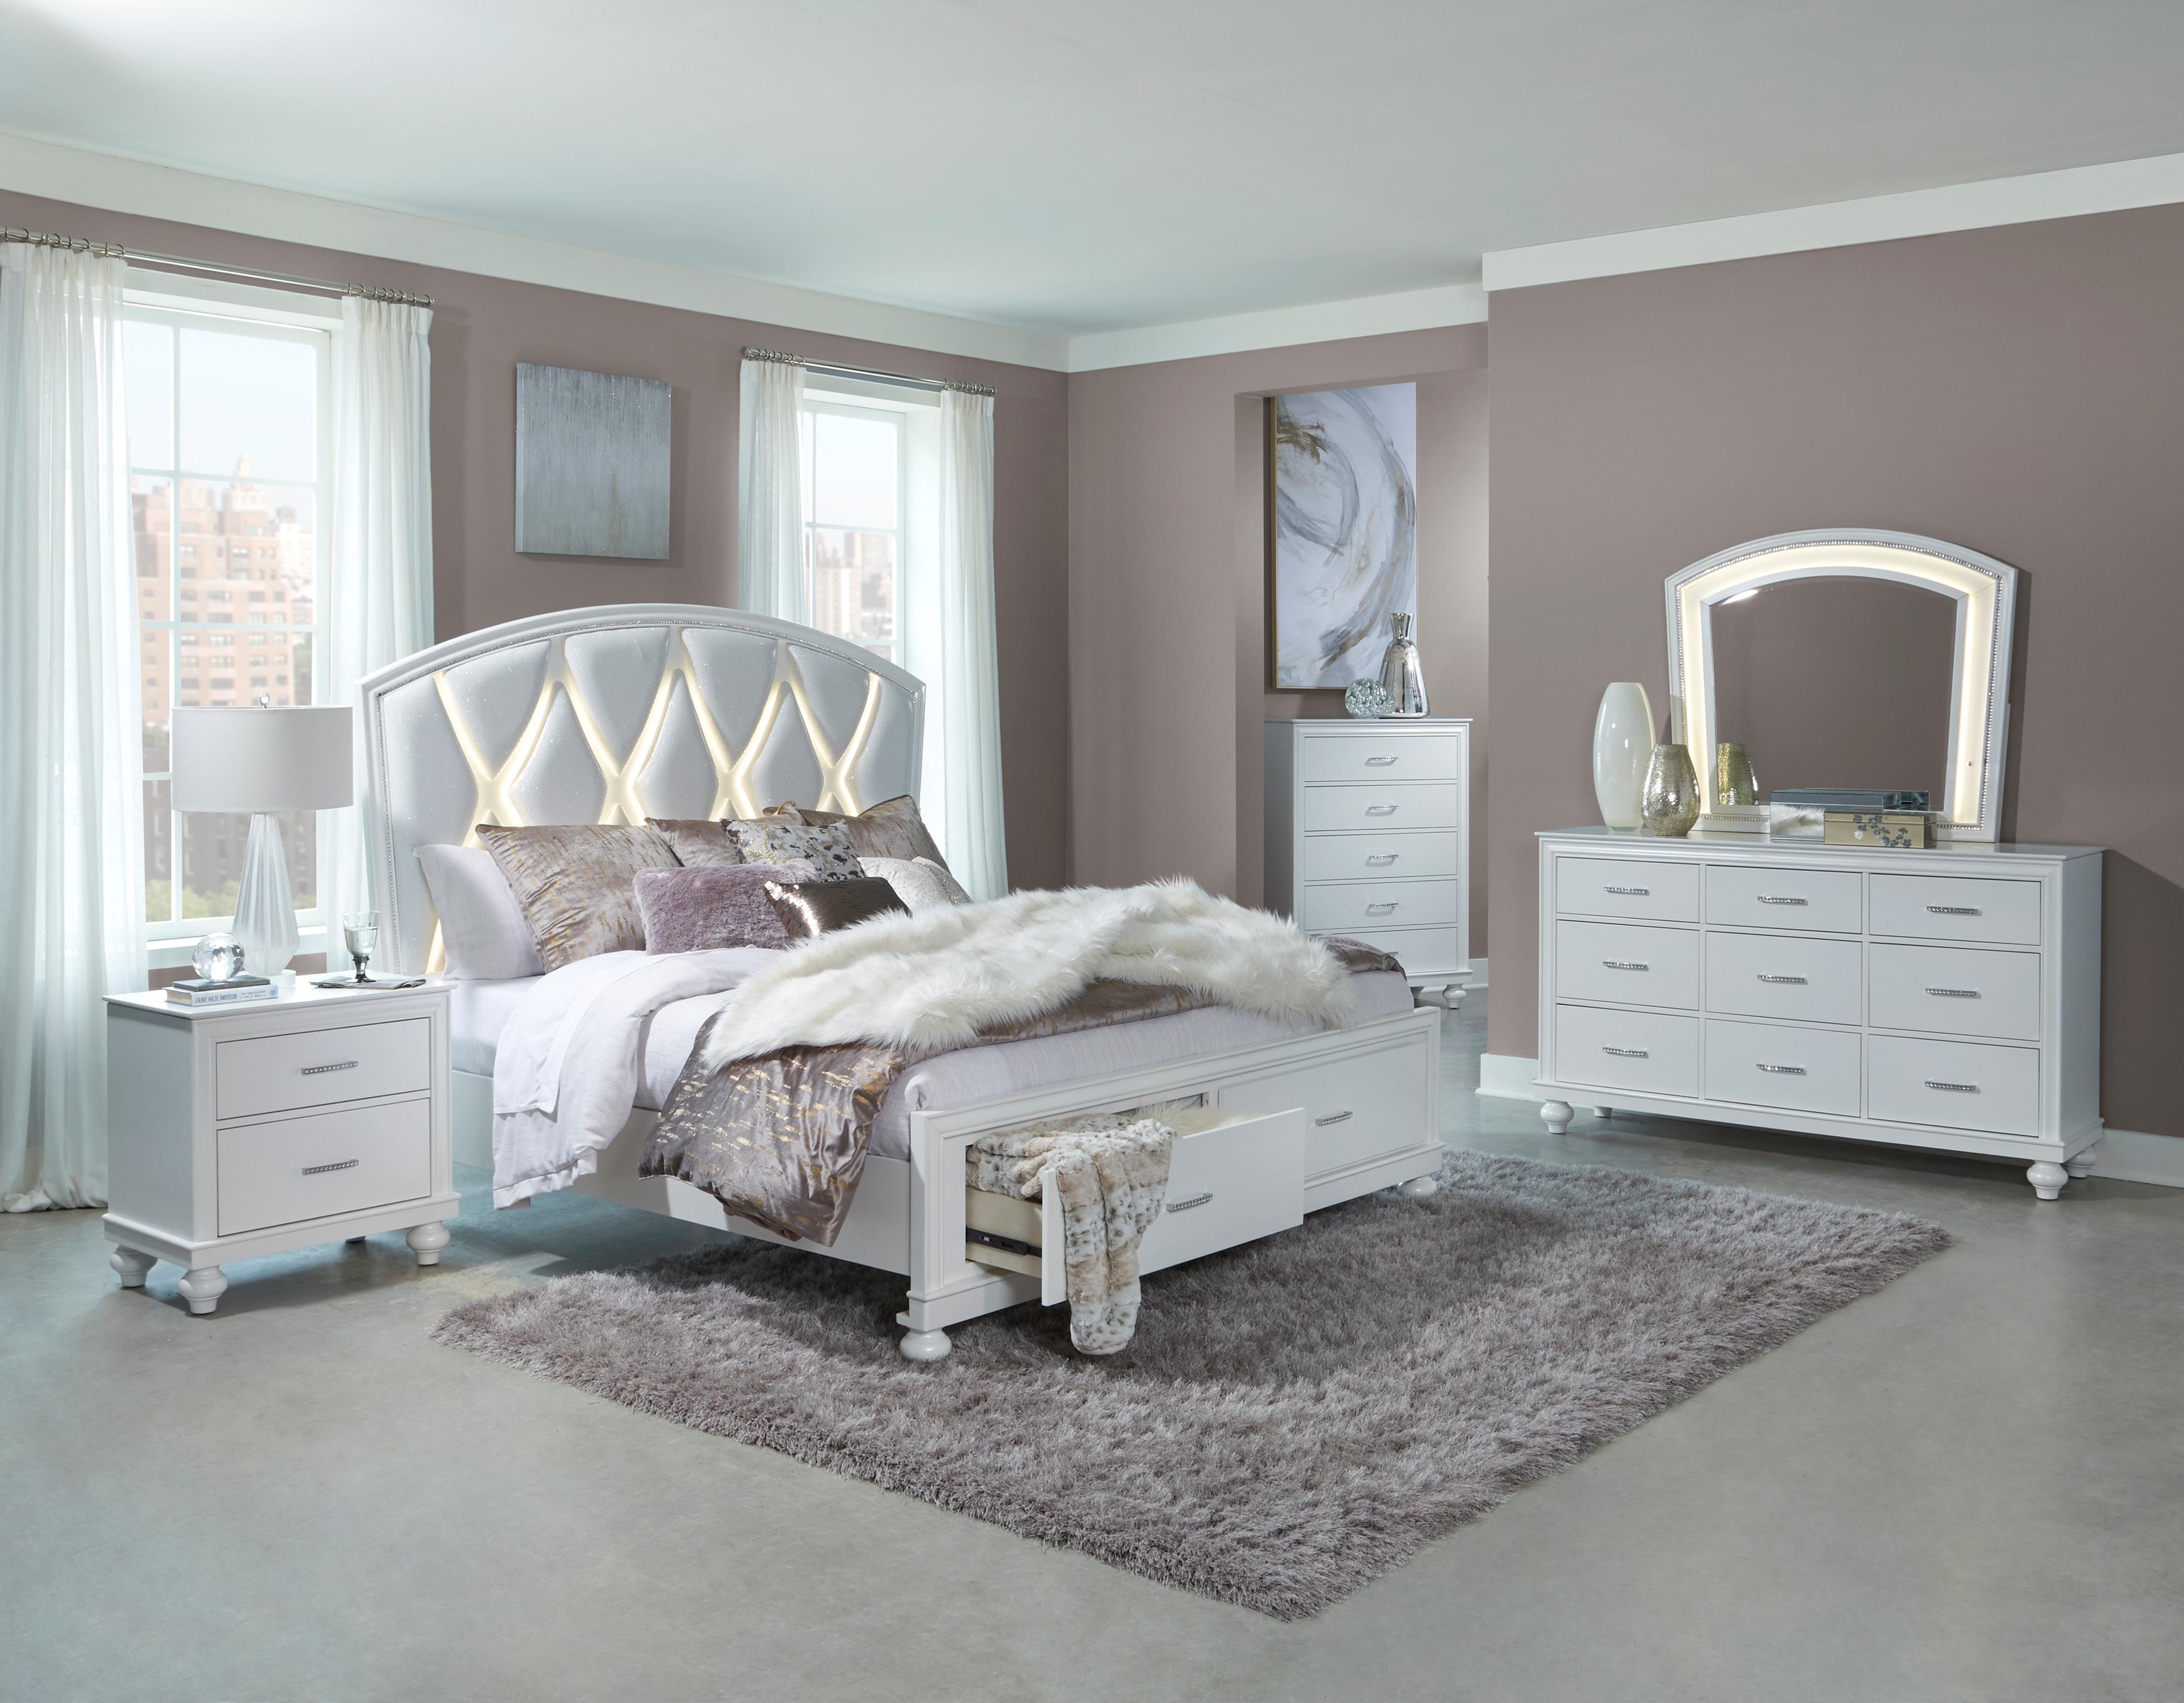 Modern Platform Bedroom Set Aria Collection Queen Platform Bedroom Set 5PCS 1436W-1-Q-5PCS 1436W-1-Q-5PCS in White Finish Faux Leather